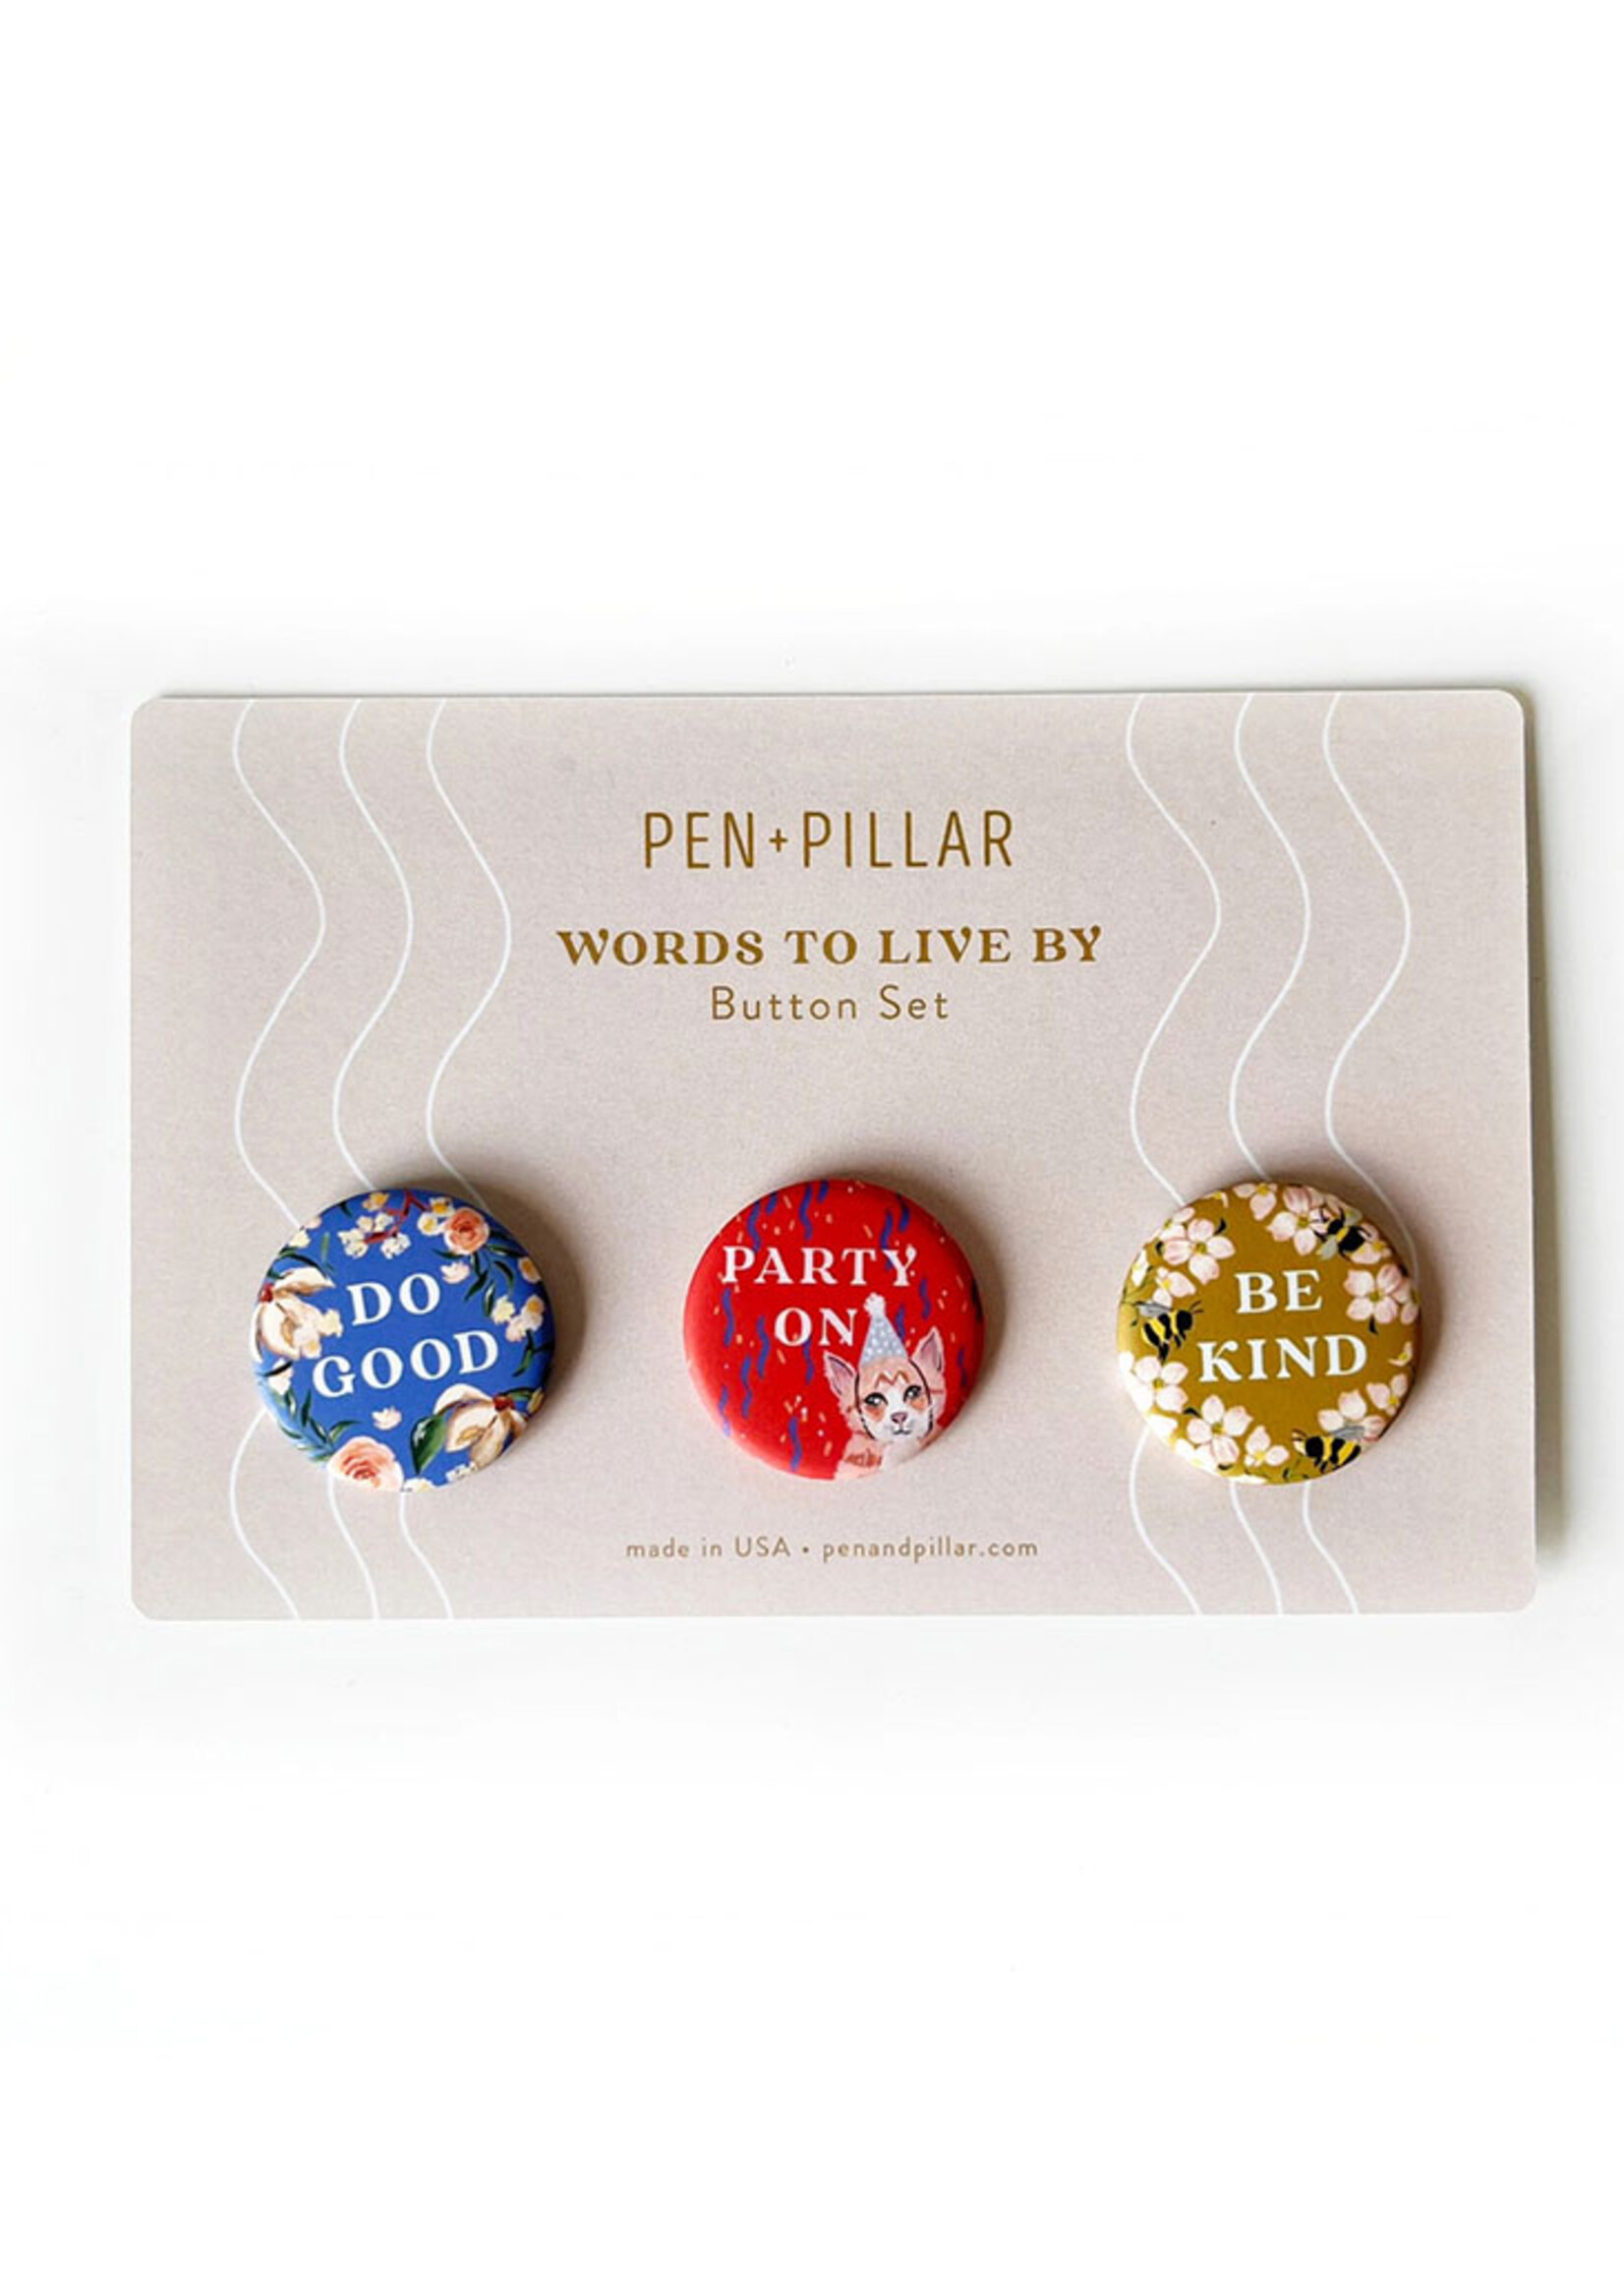 Pen + Pillar Button Set - Words To Live By